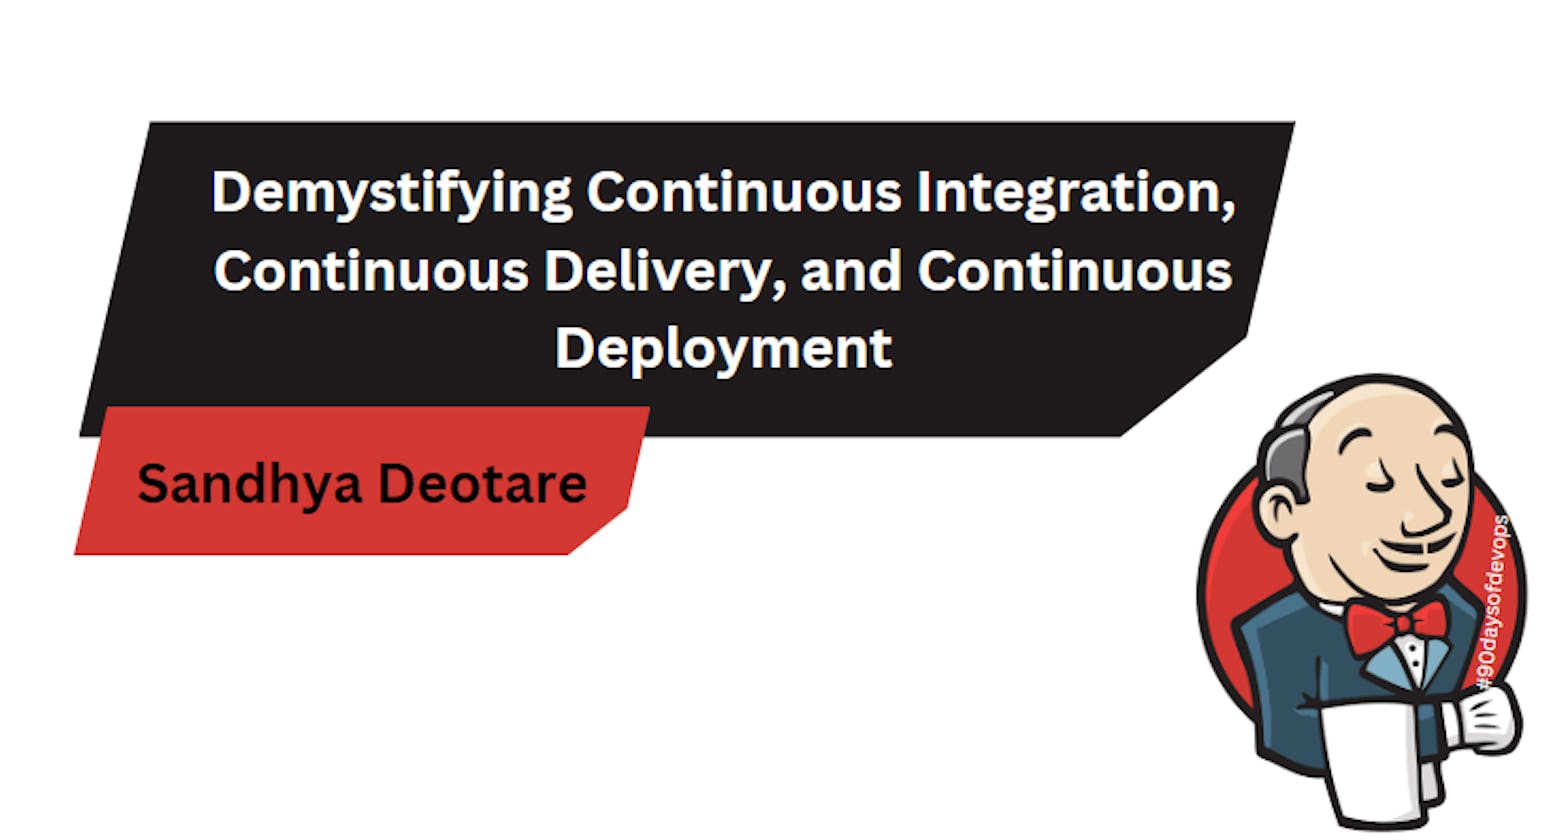 Demystifying Continuous Integration, Continuous Delivery, and Continuous Deployment in Jenkins